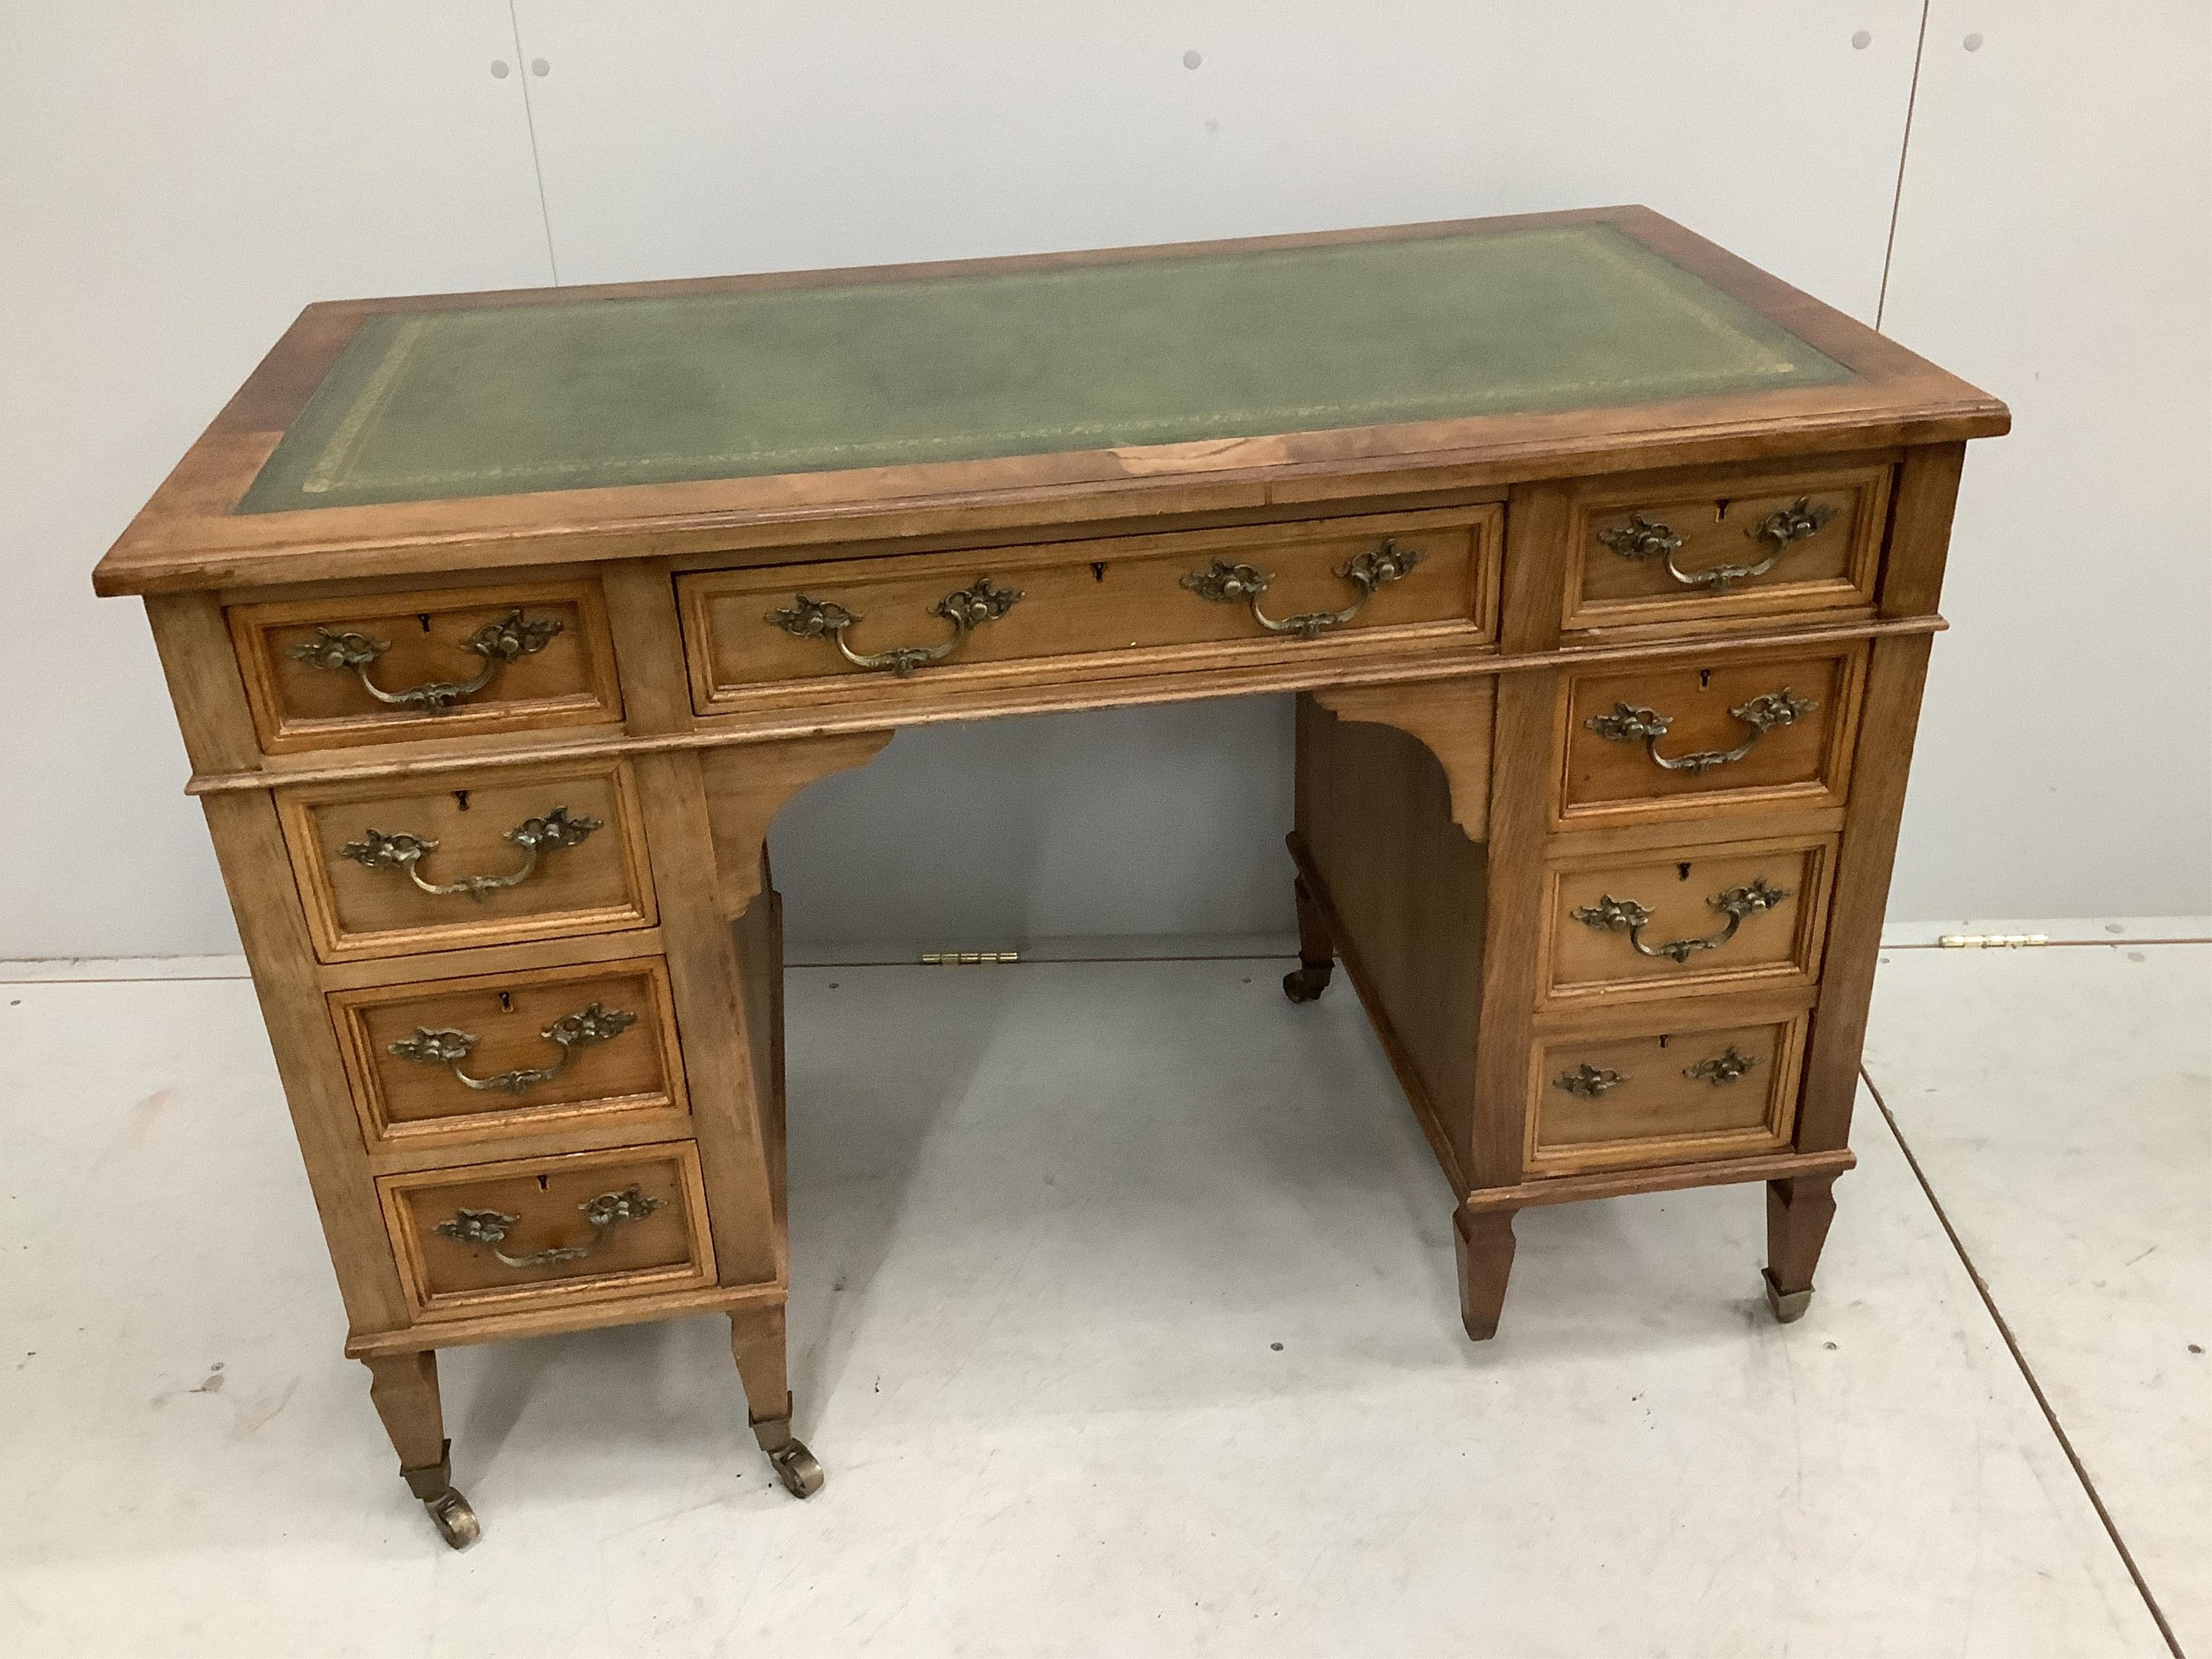 A late Victorian walnut nine drawer kneehole desk, missing two castors and one handle, width 112cm, depth 59cm, height 78cm. Condition - fair